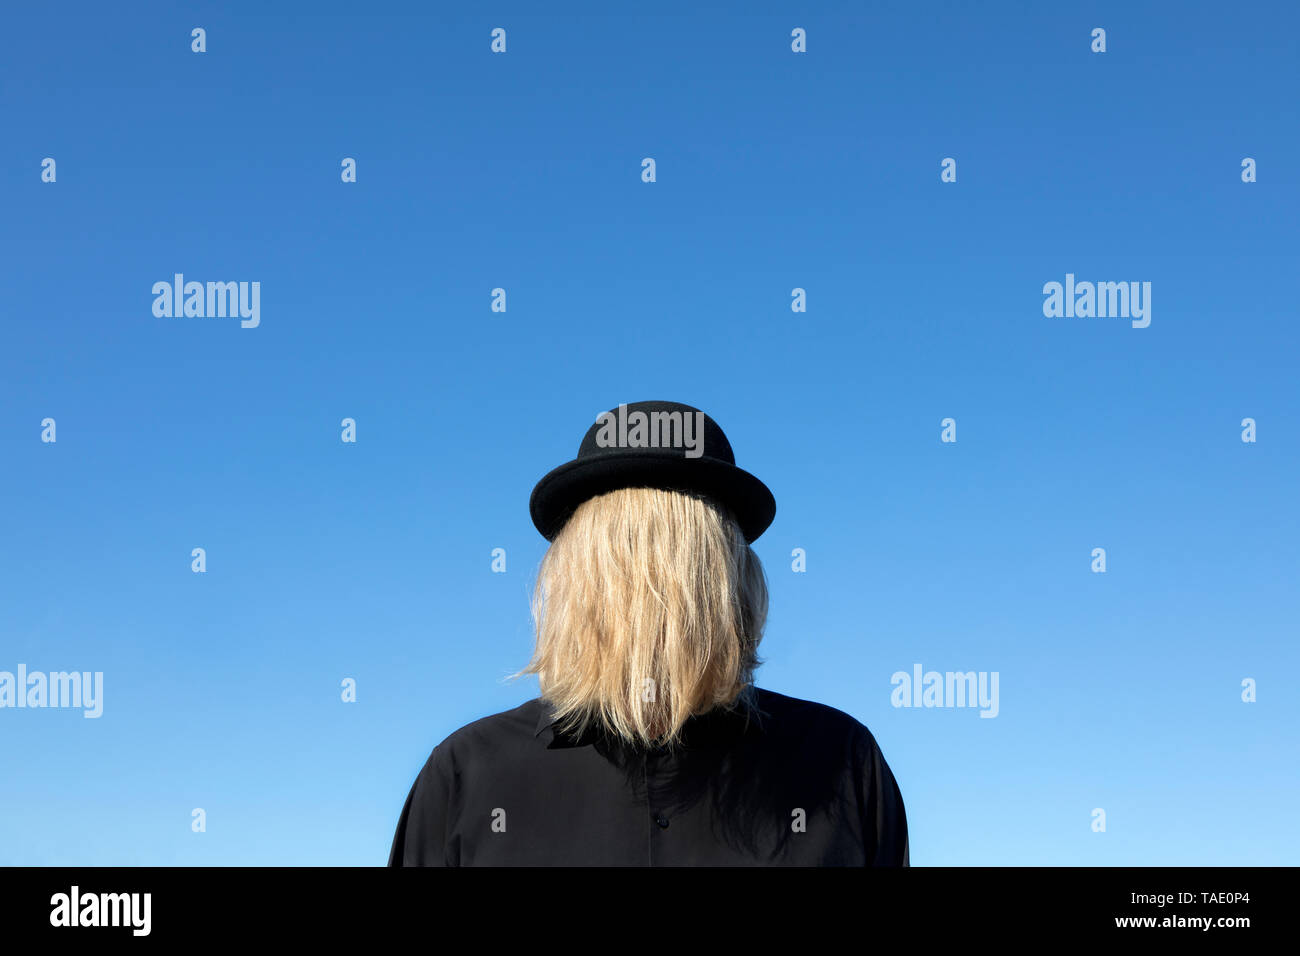 Blond hair covering man's face wearing bowler hat Stock Photo